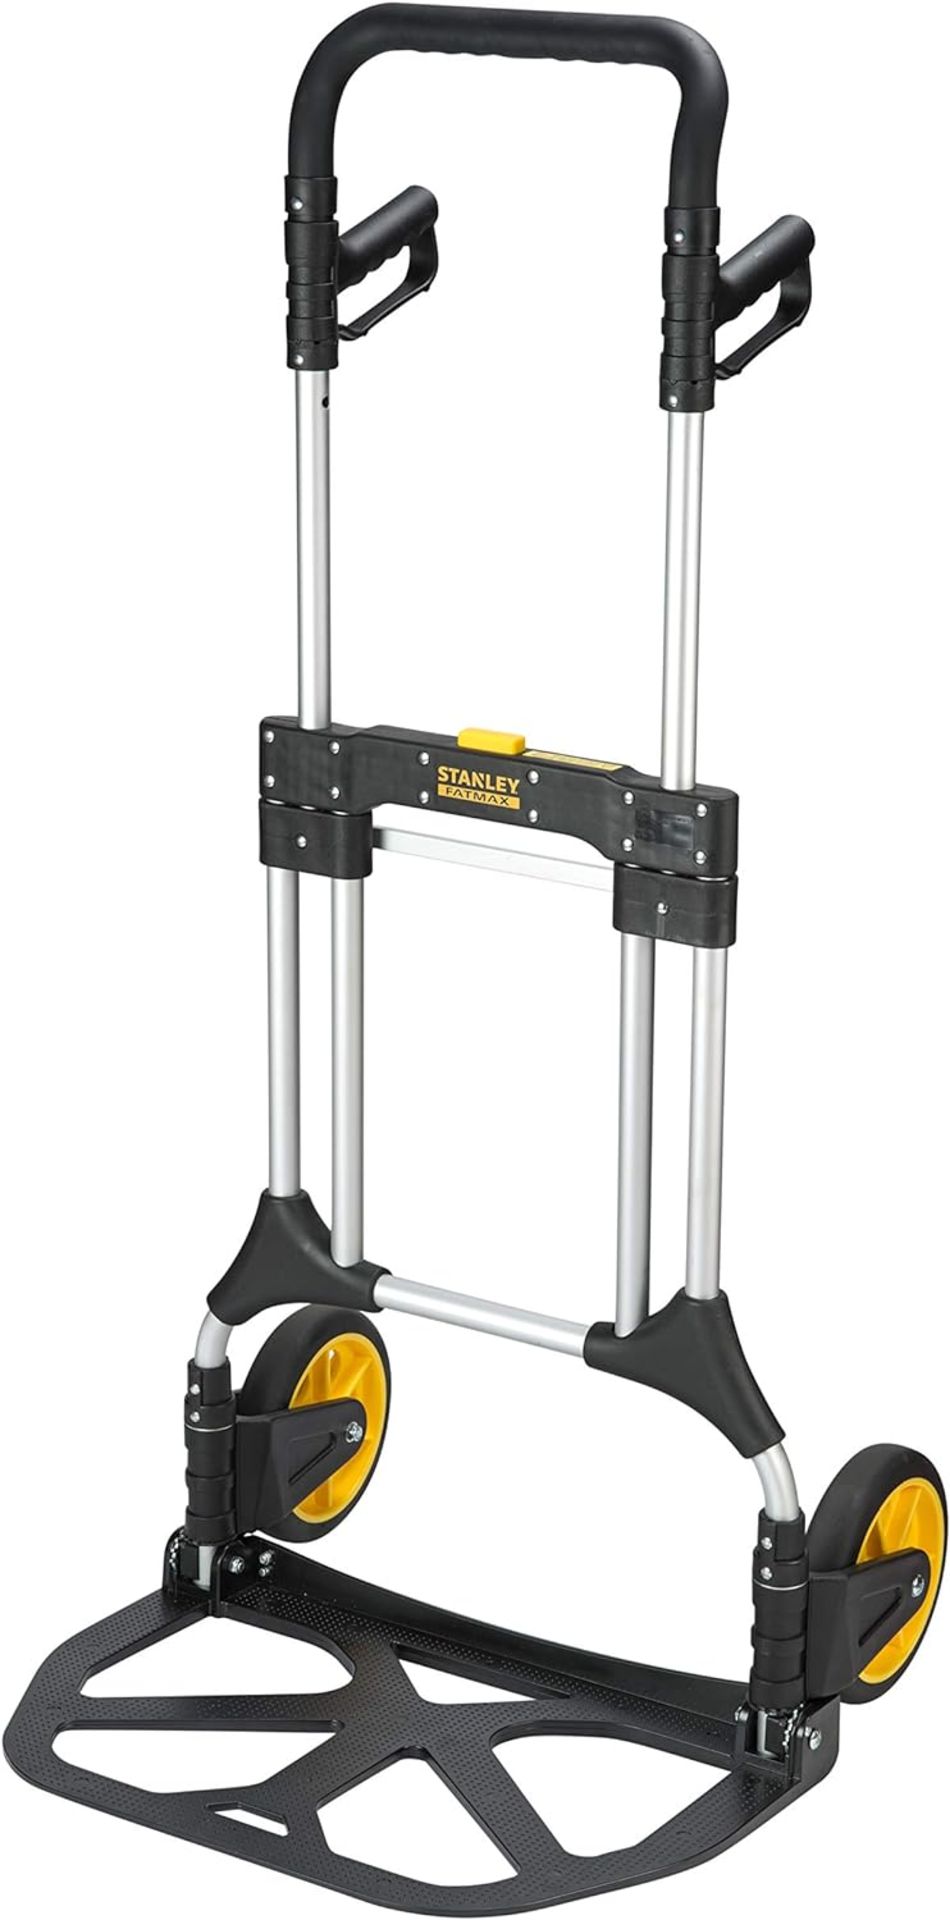 2 x Brand New STANLEY Aluminium Sack Truck, Black, Silver, FXWT-705, Multifunctional: ideal for